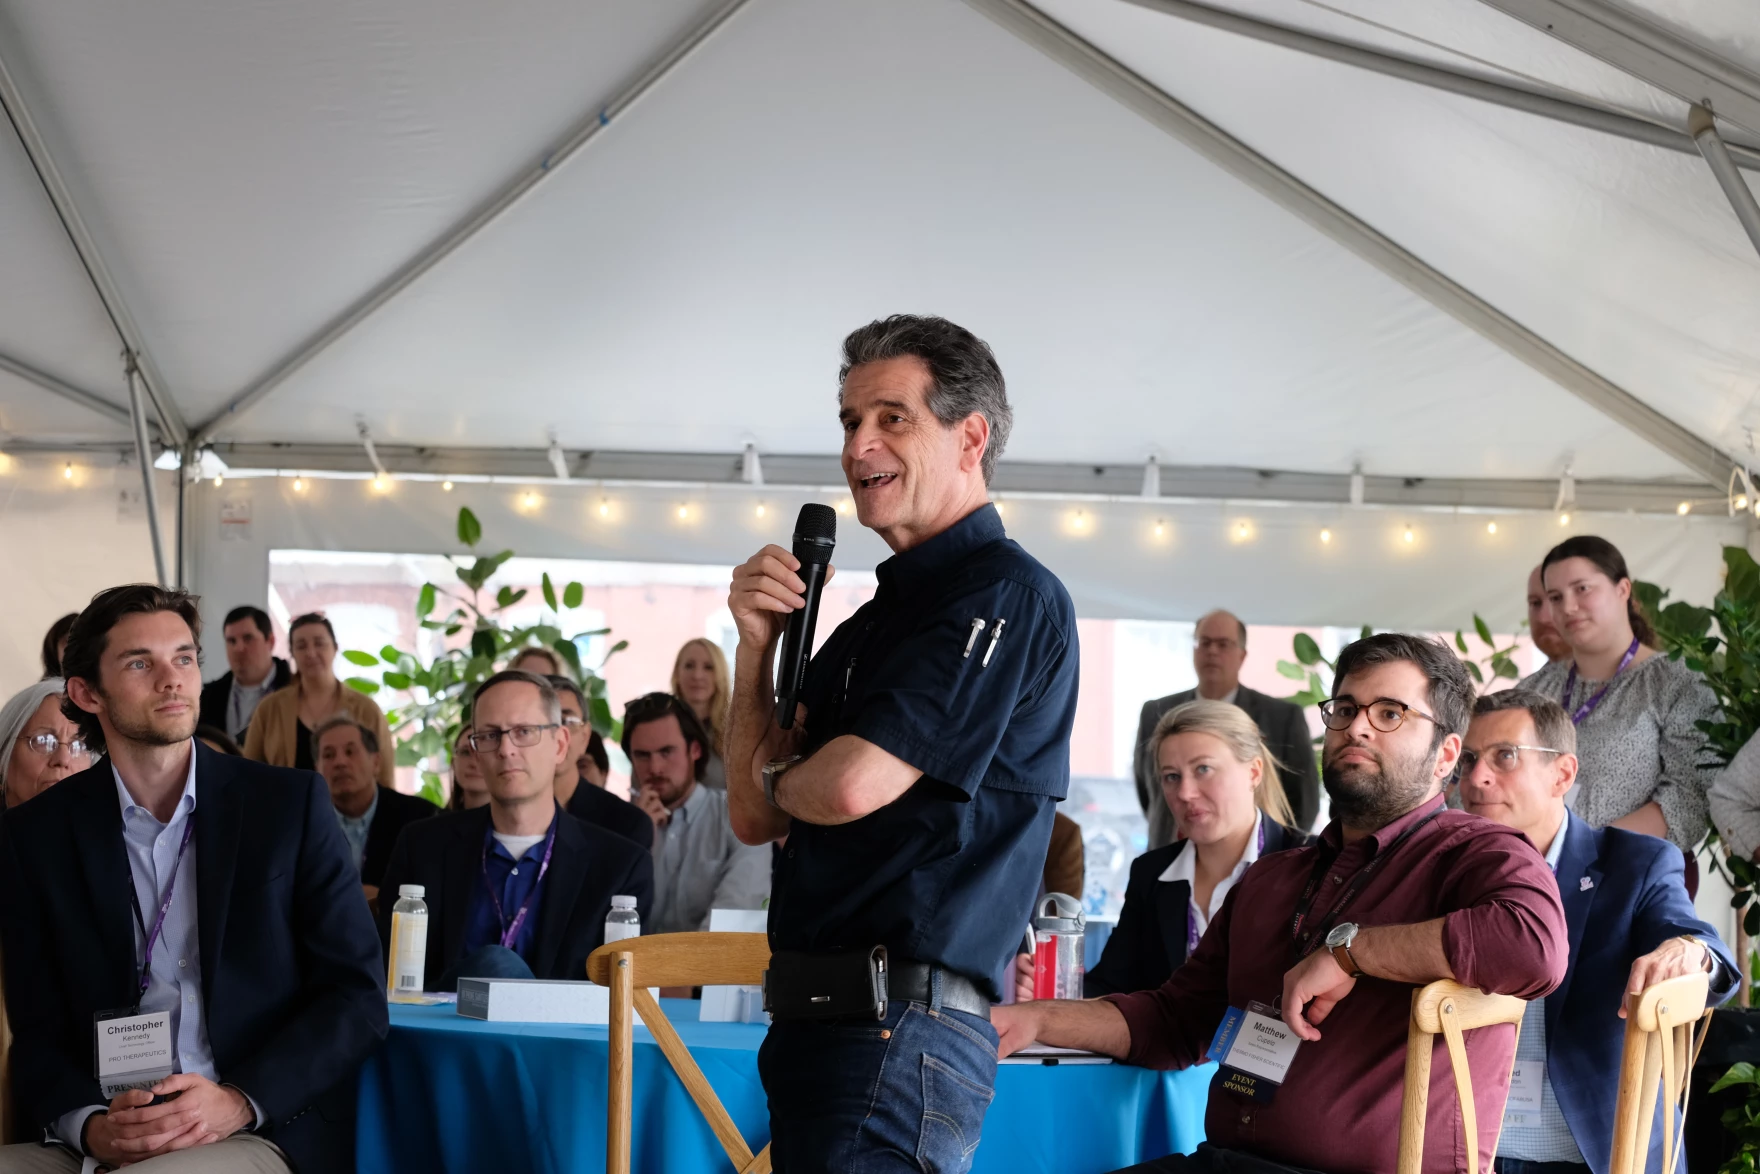 Dean Kamen’s Private Companies Reap Millions From the Federally Funded Nonprofit He Runs